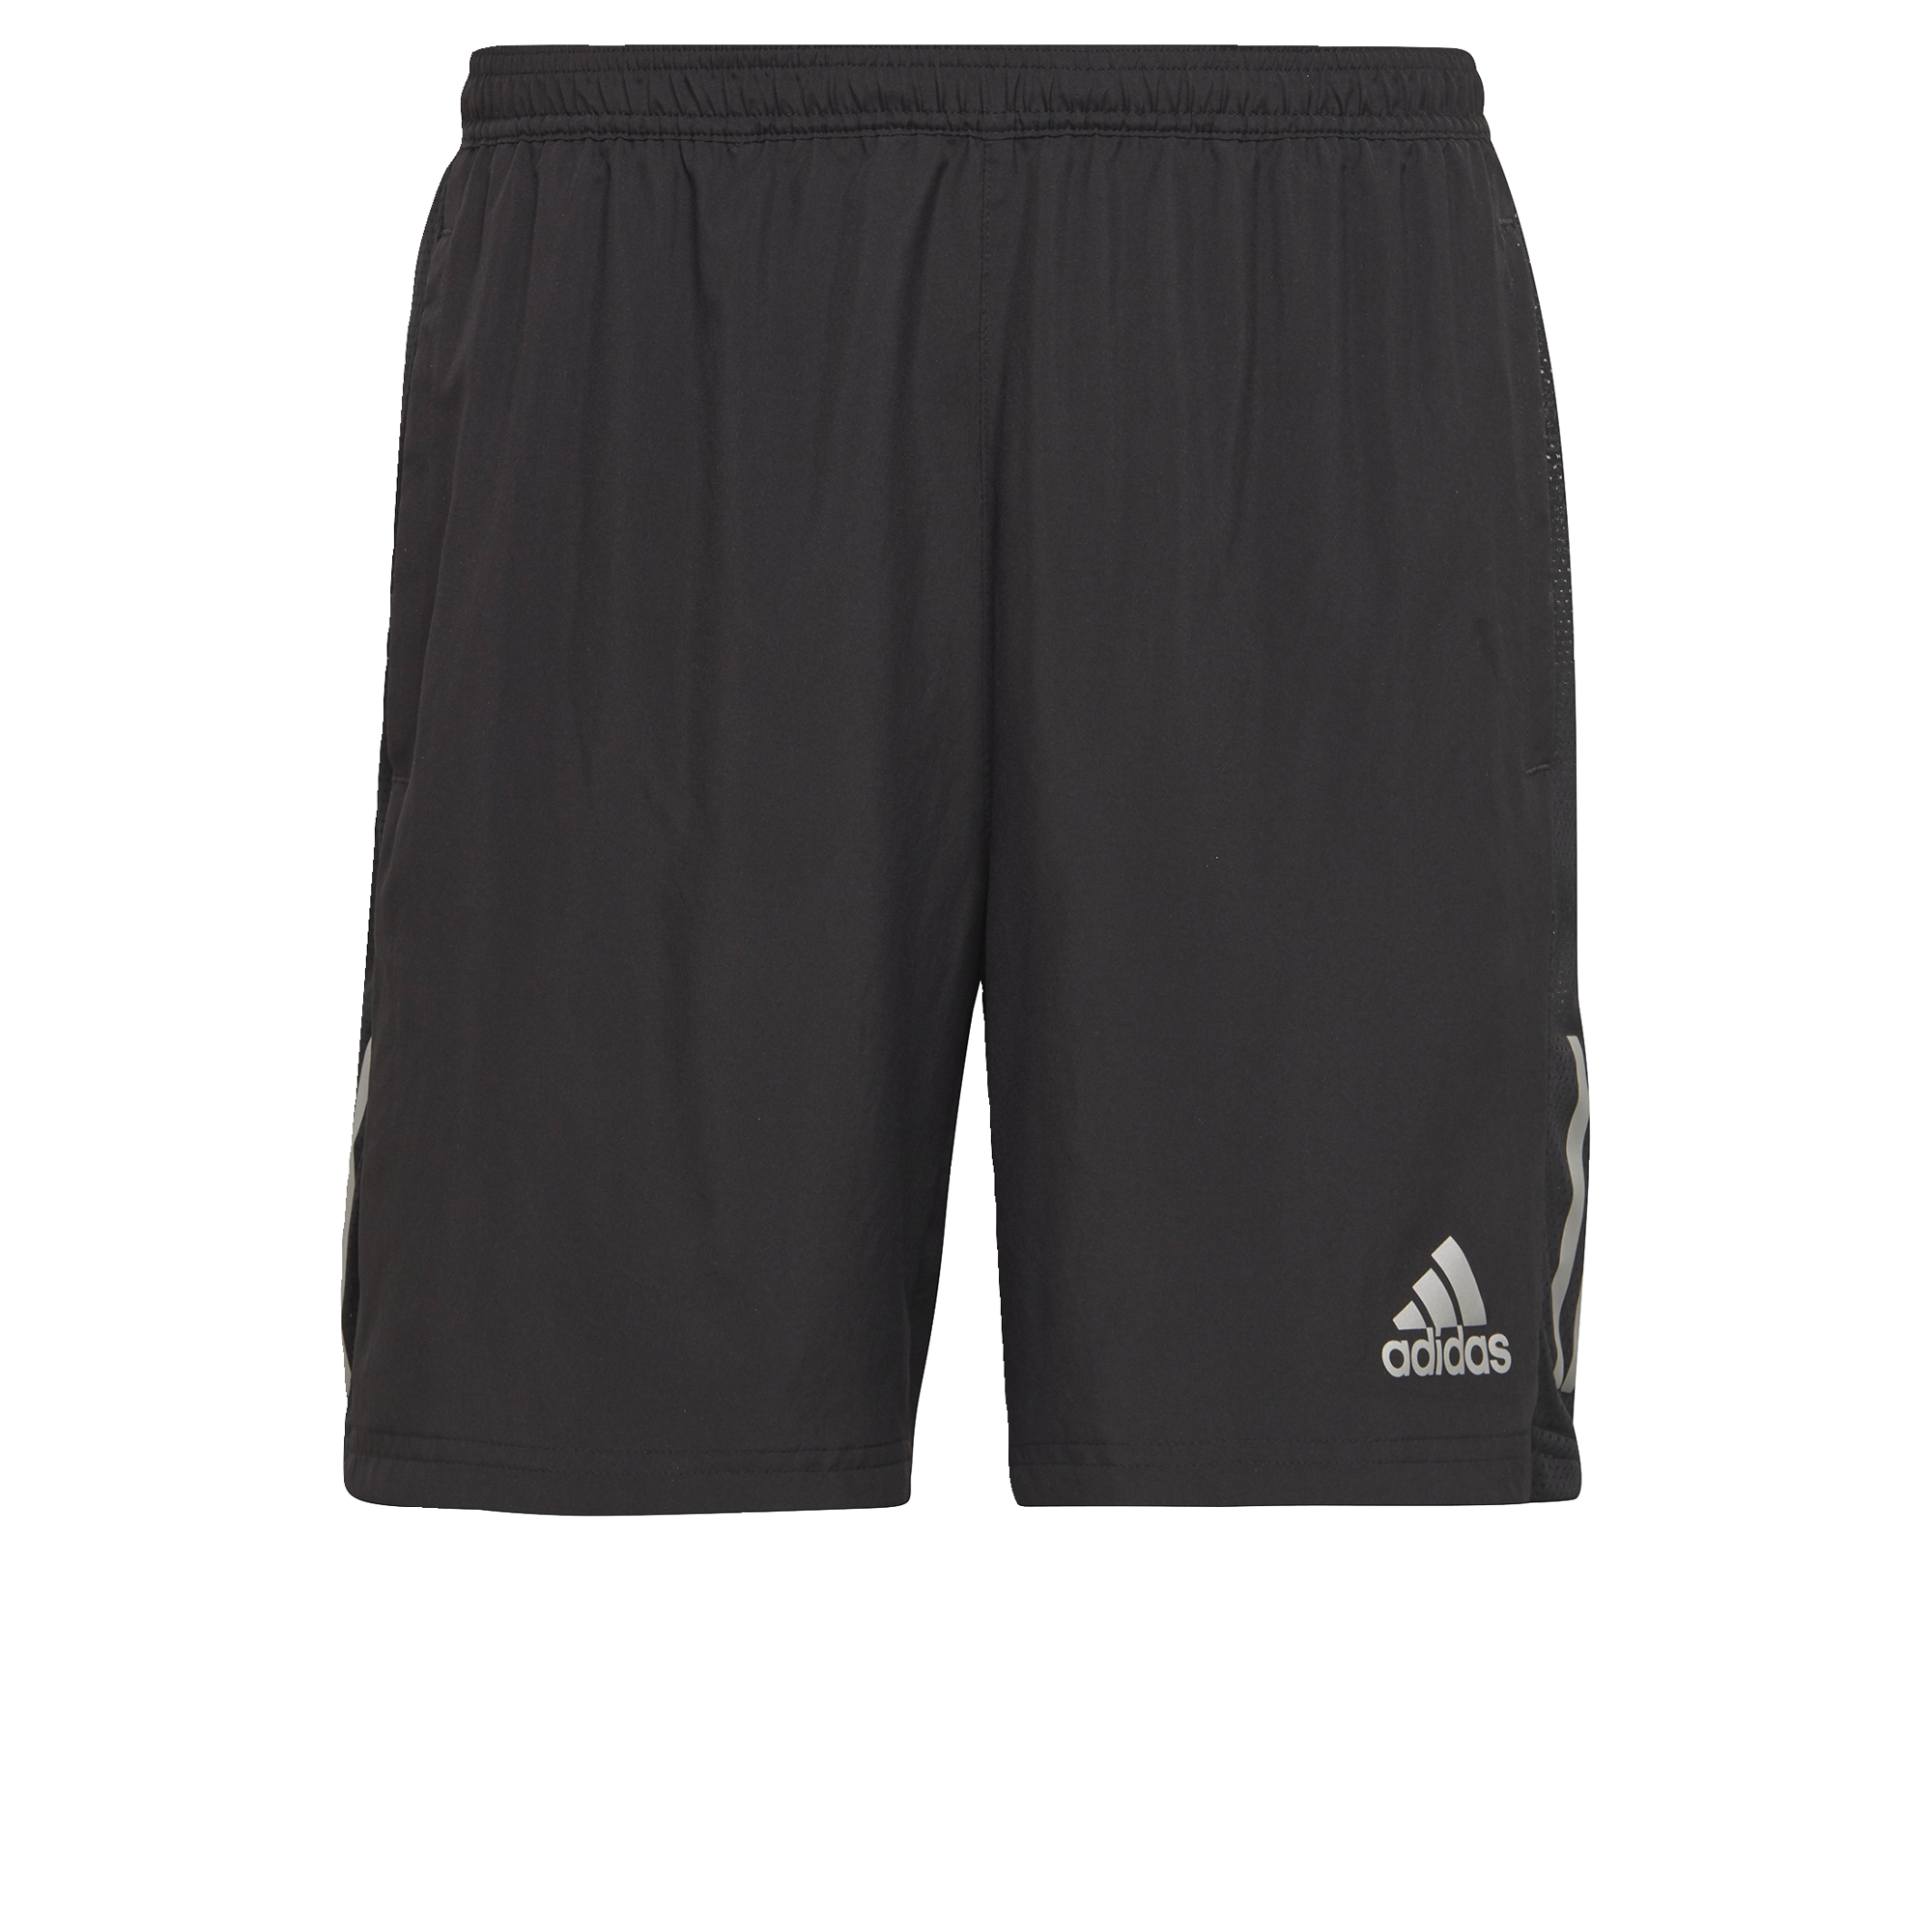 adidas RUNNING Own the Run Two-in-One Shorts Men Black FS9809